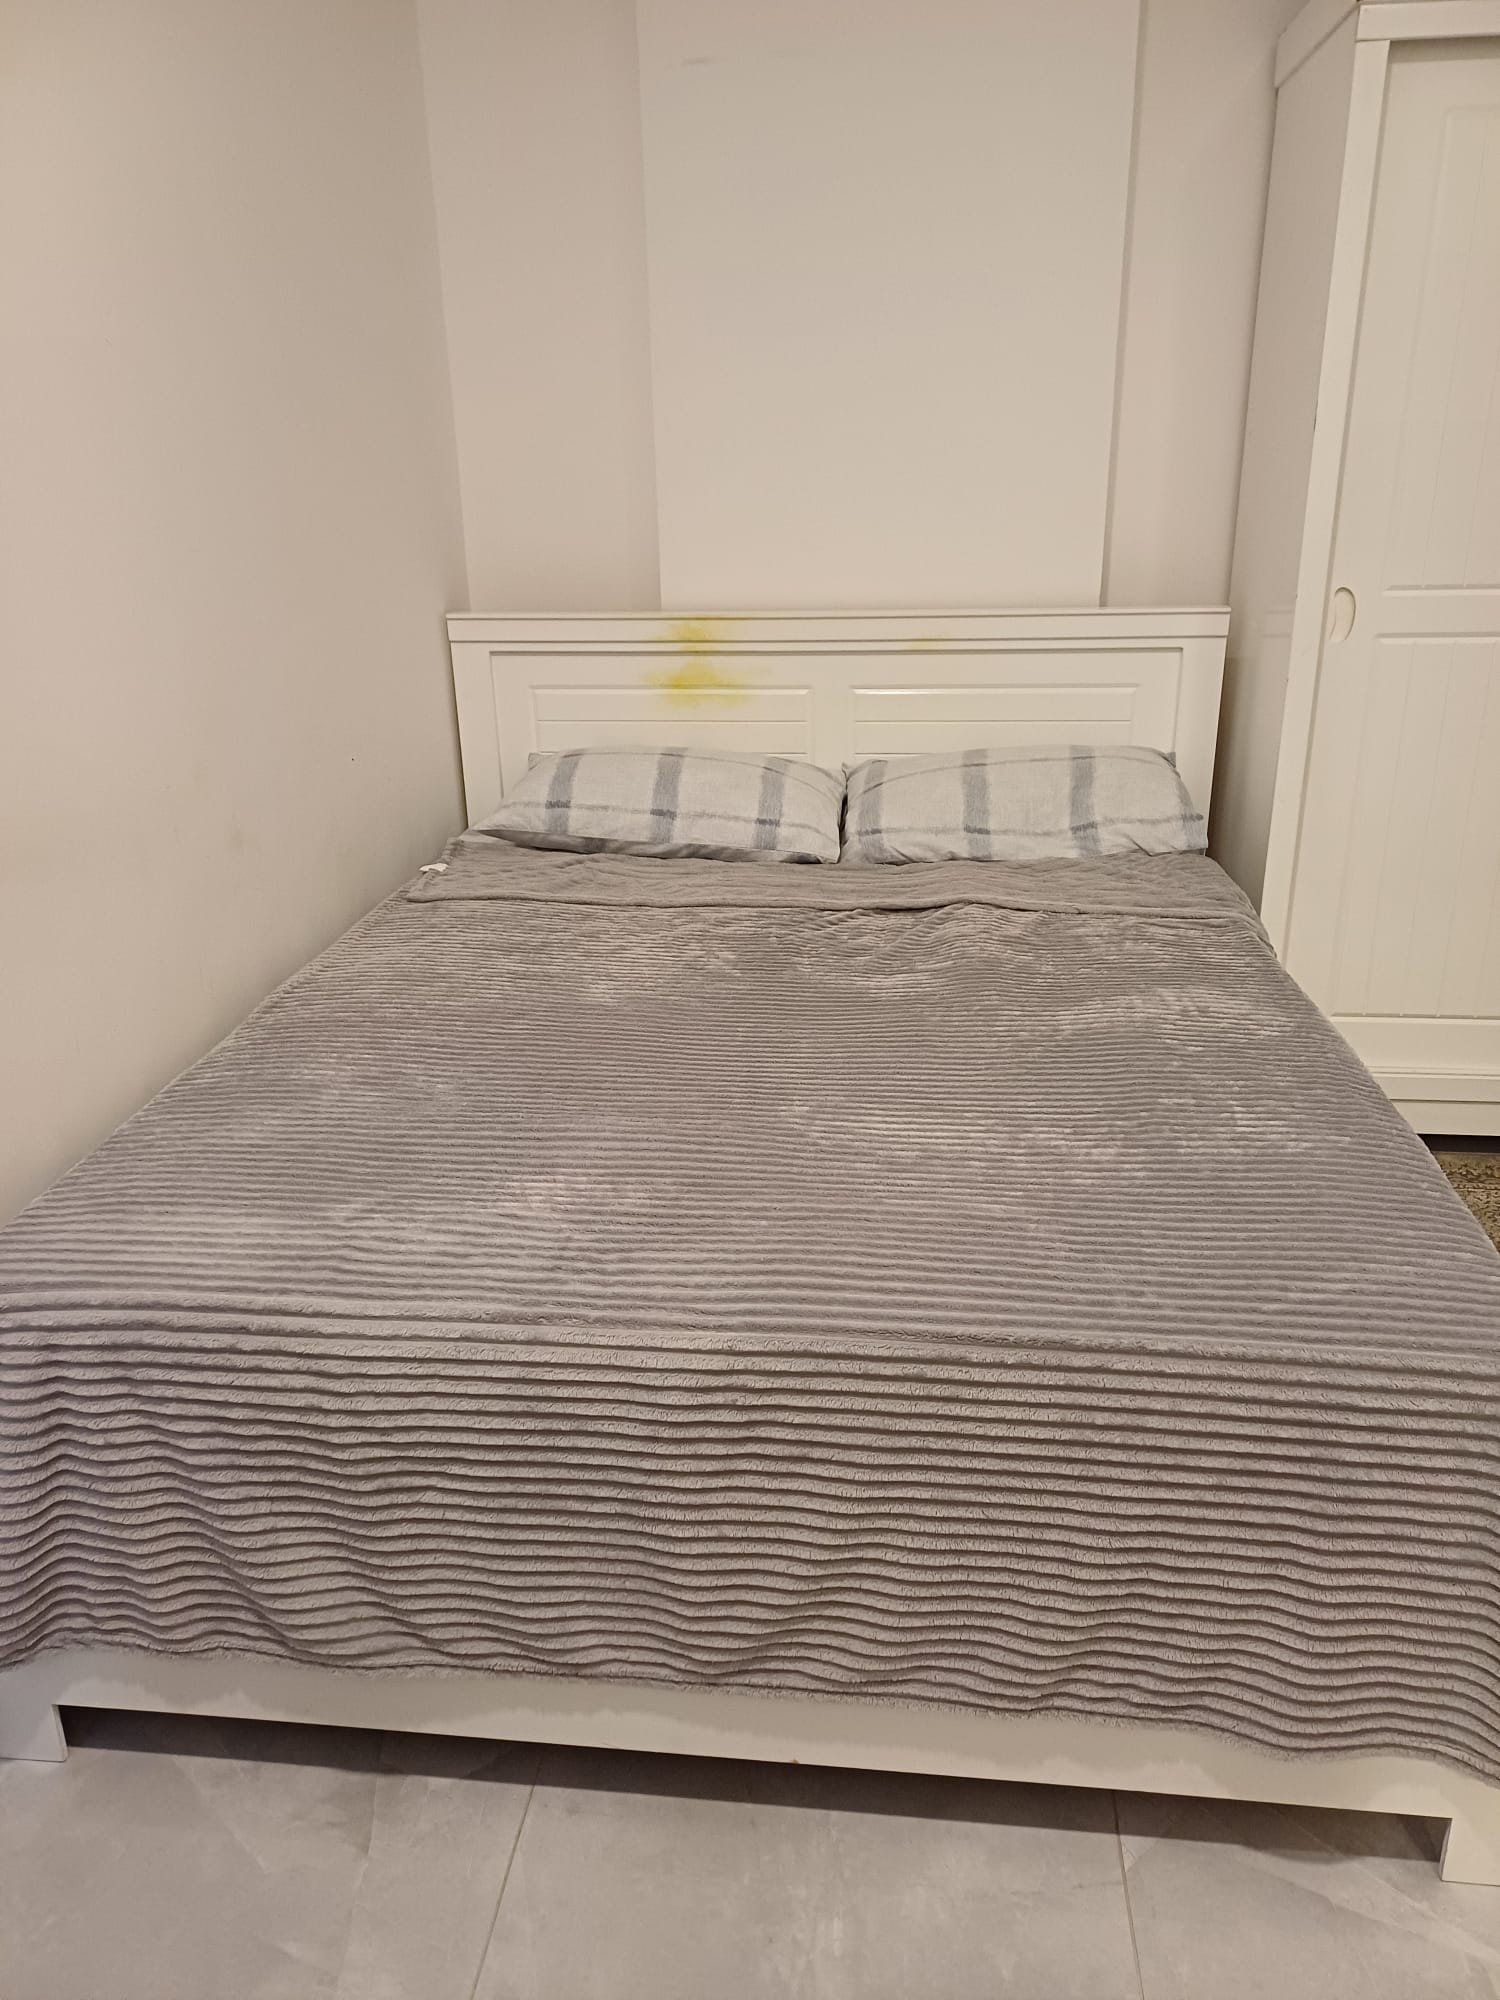 Bed (Queen size), Premium 3 layers mattress, and side table available for sale